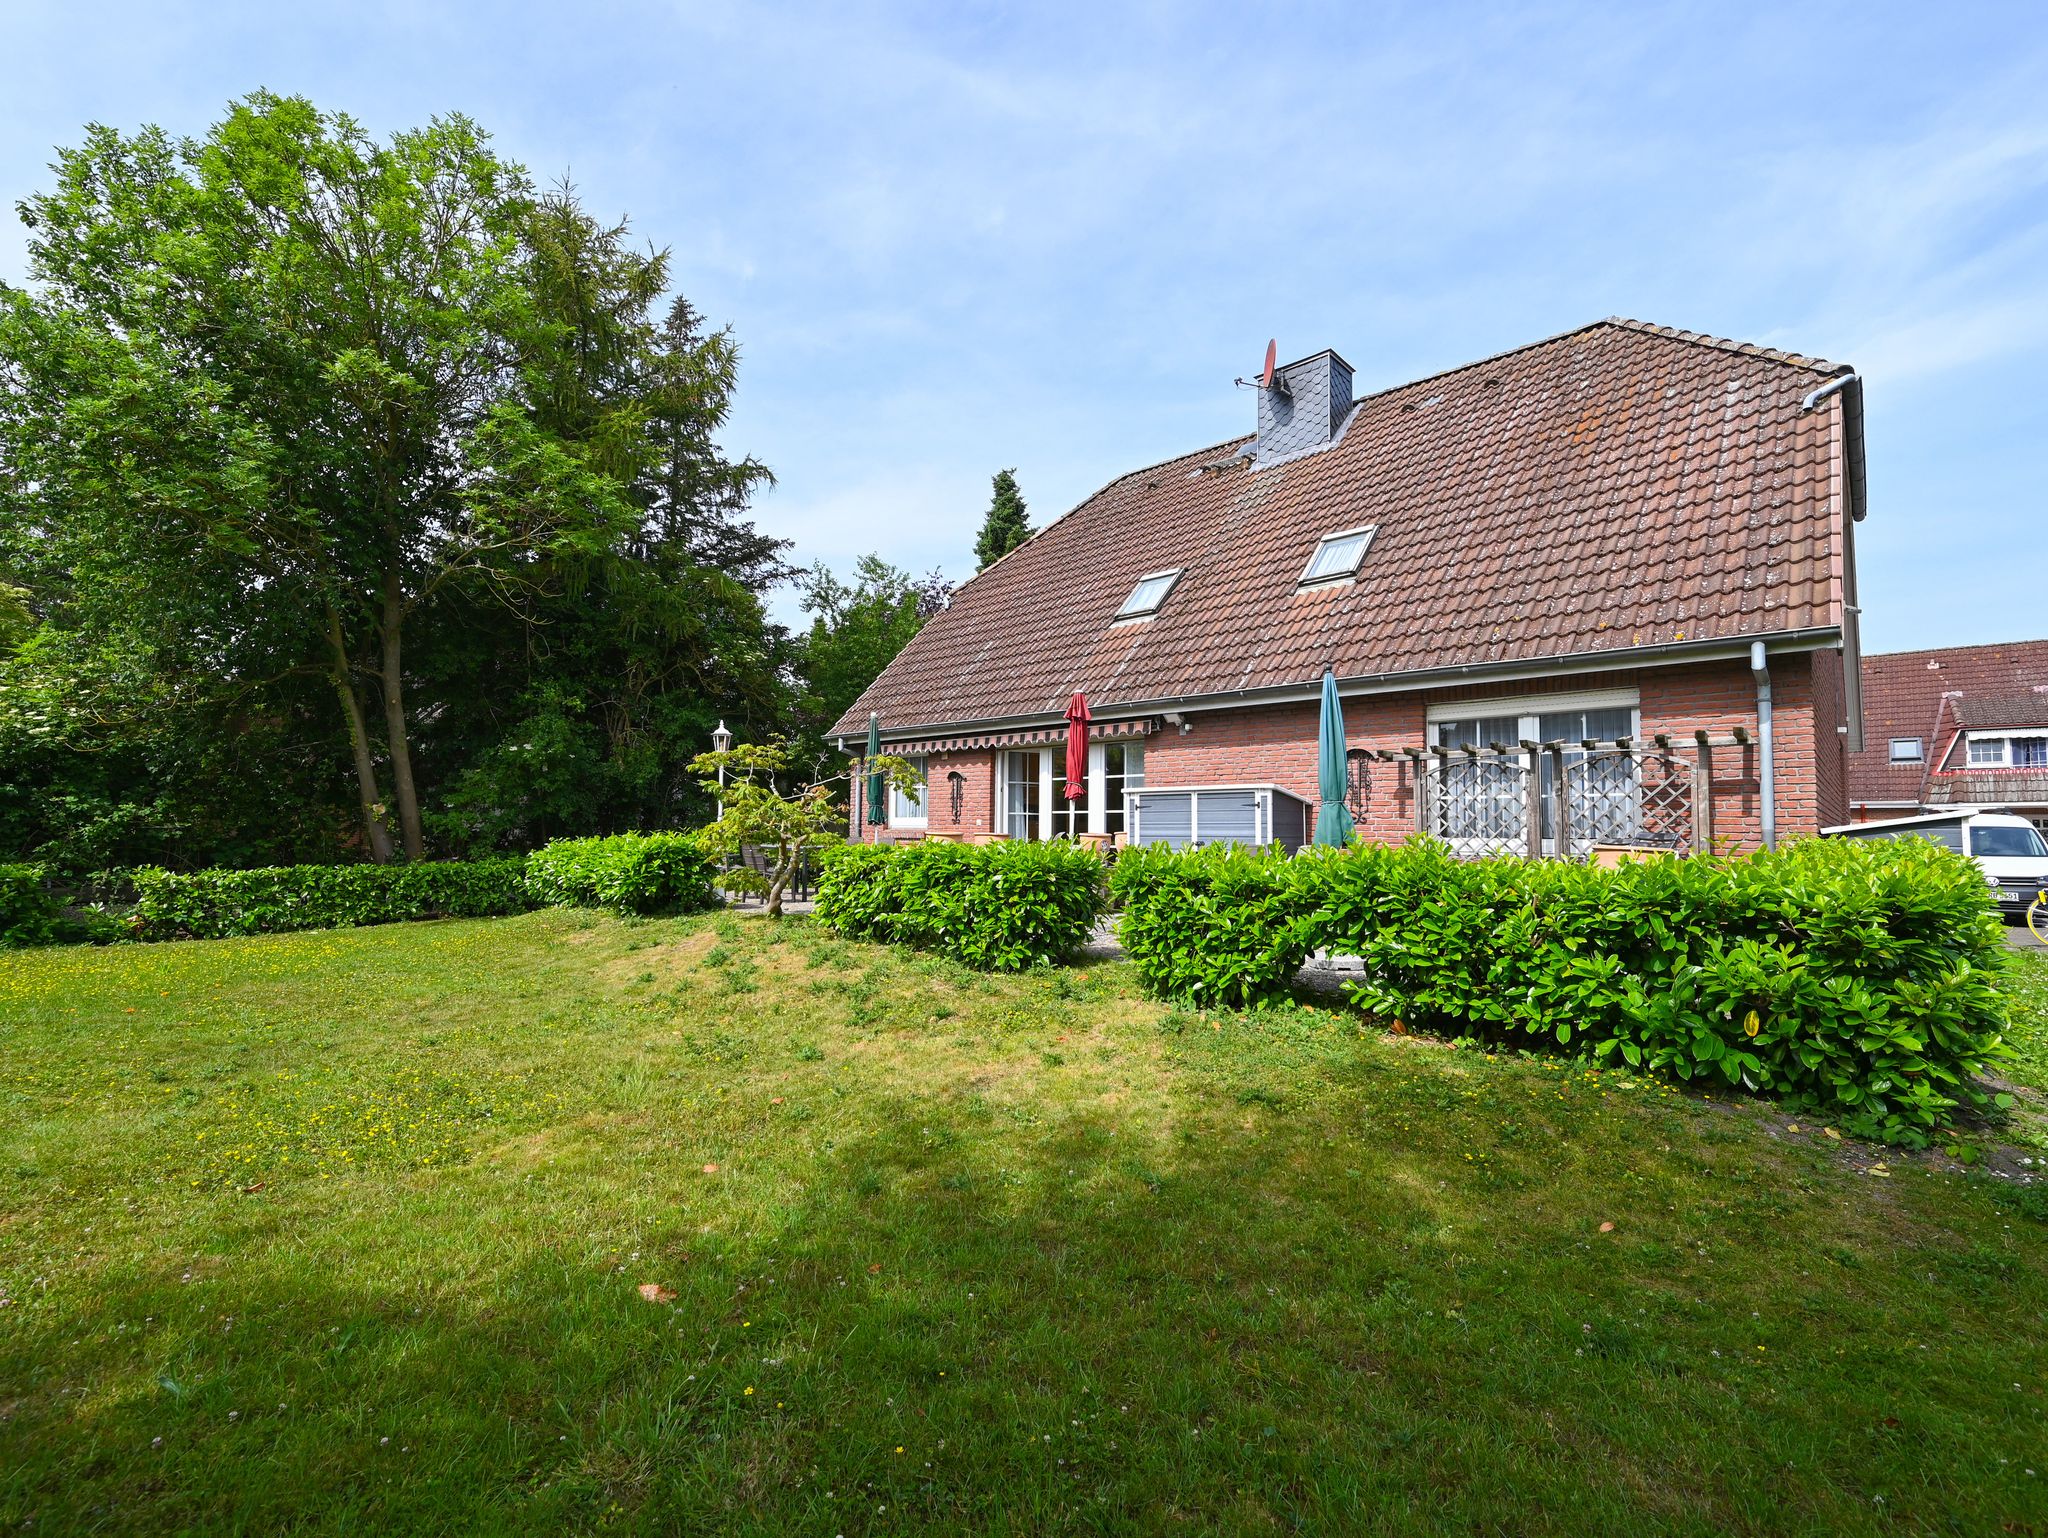 Ostsee - Appartement Nr. 29 